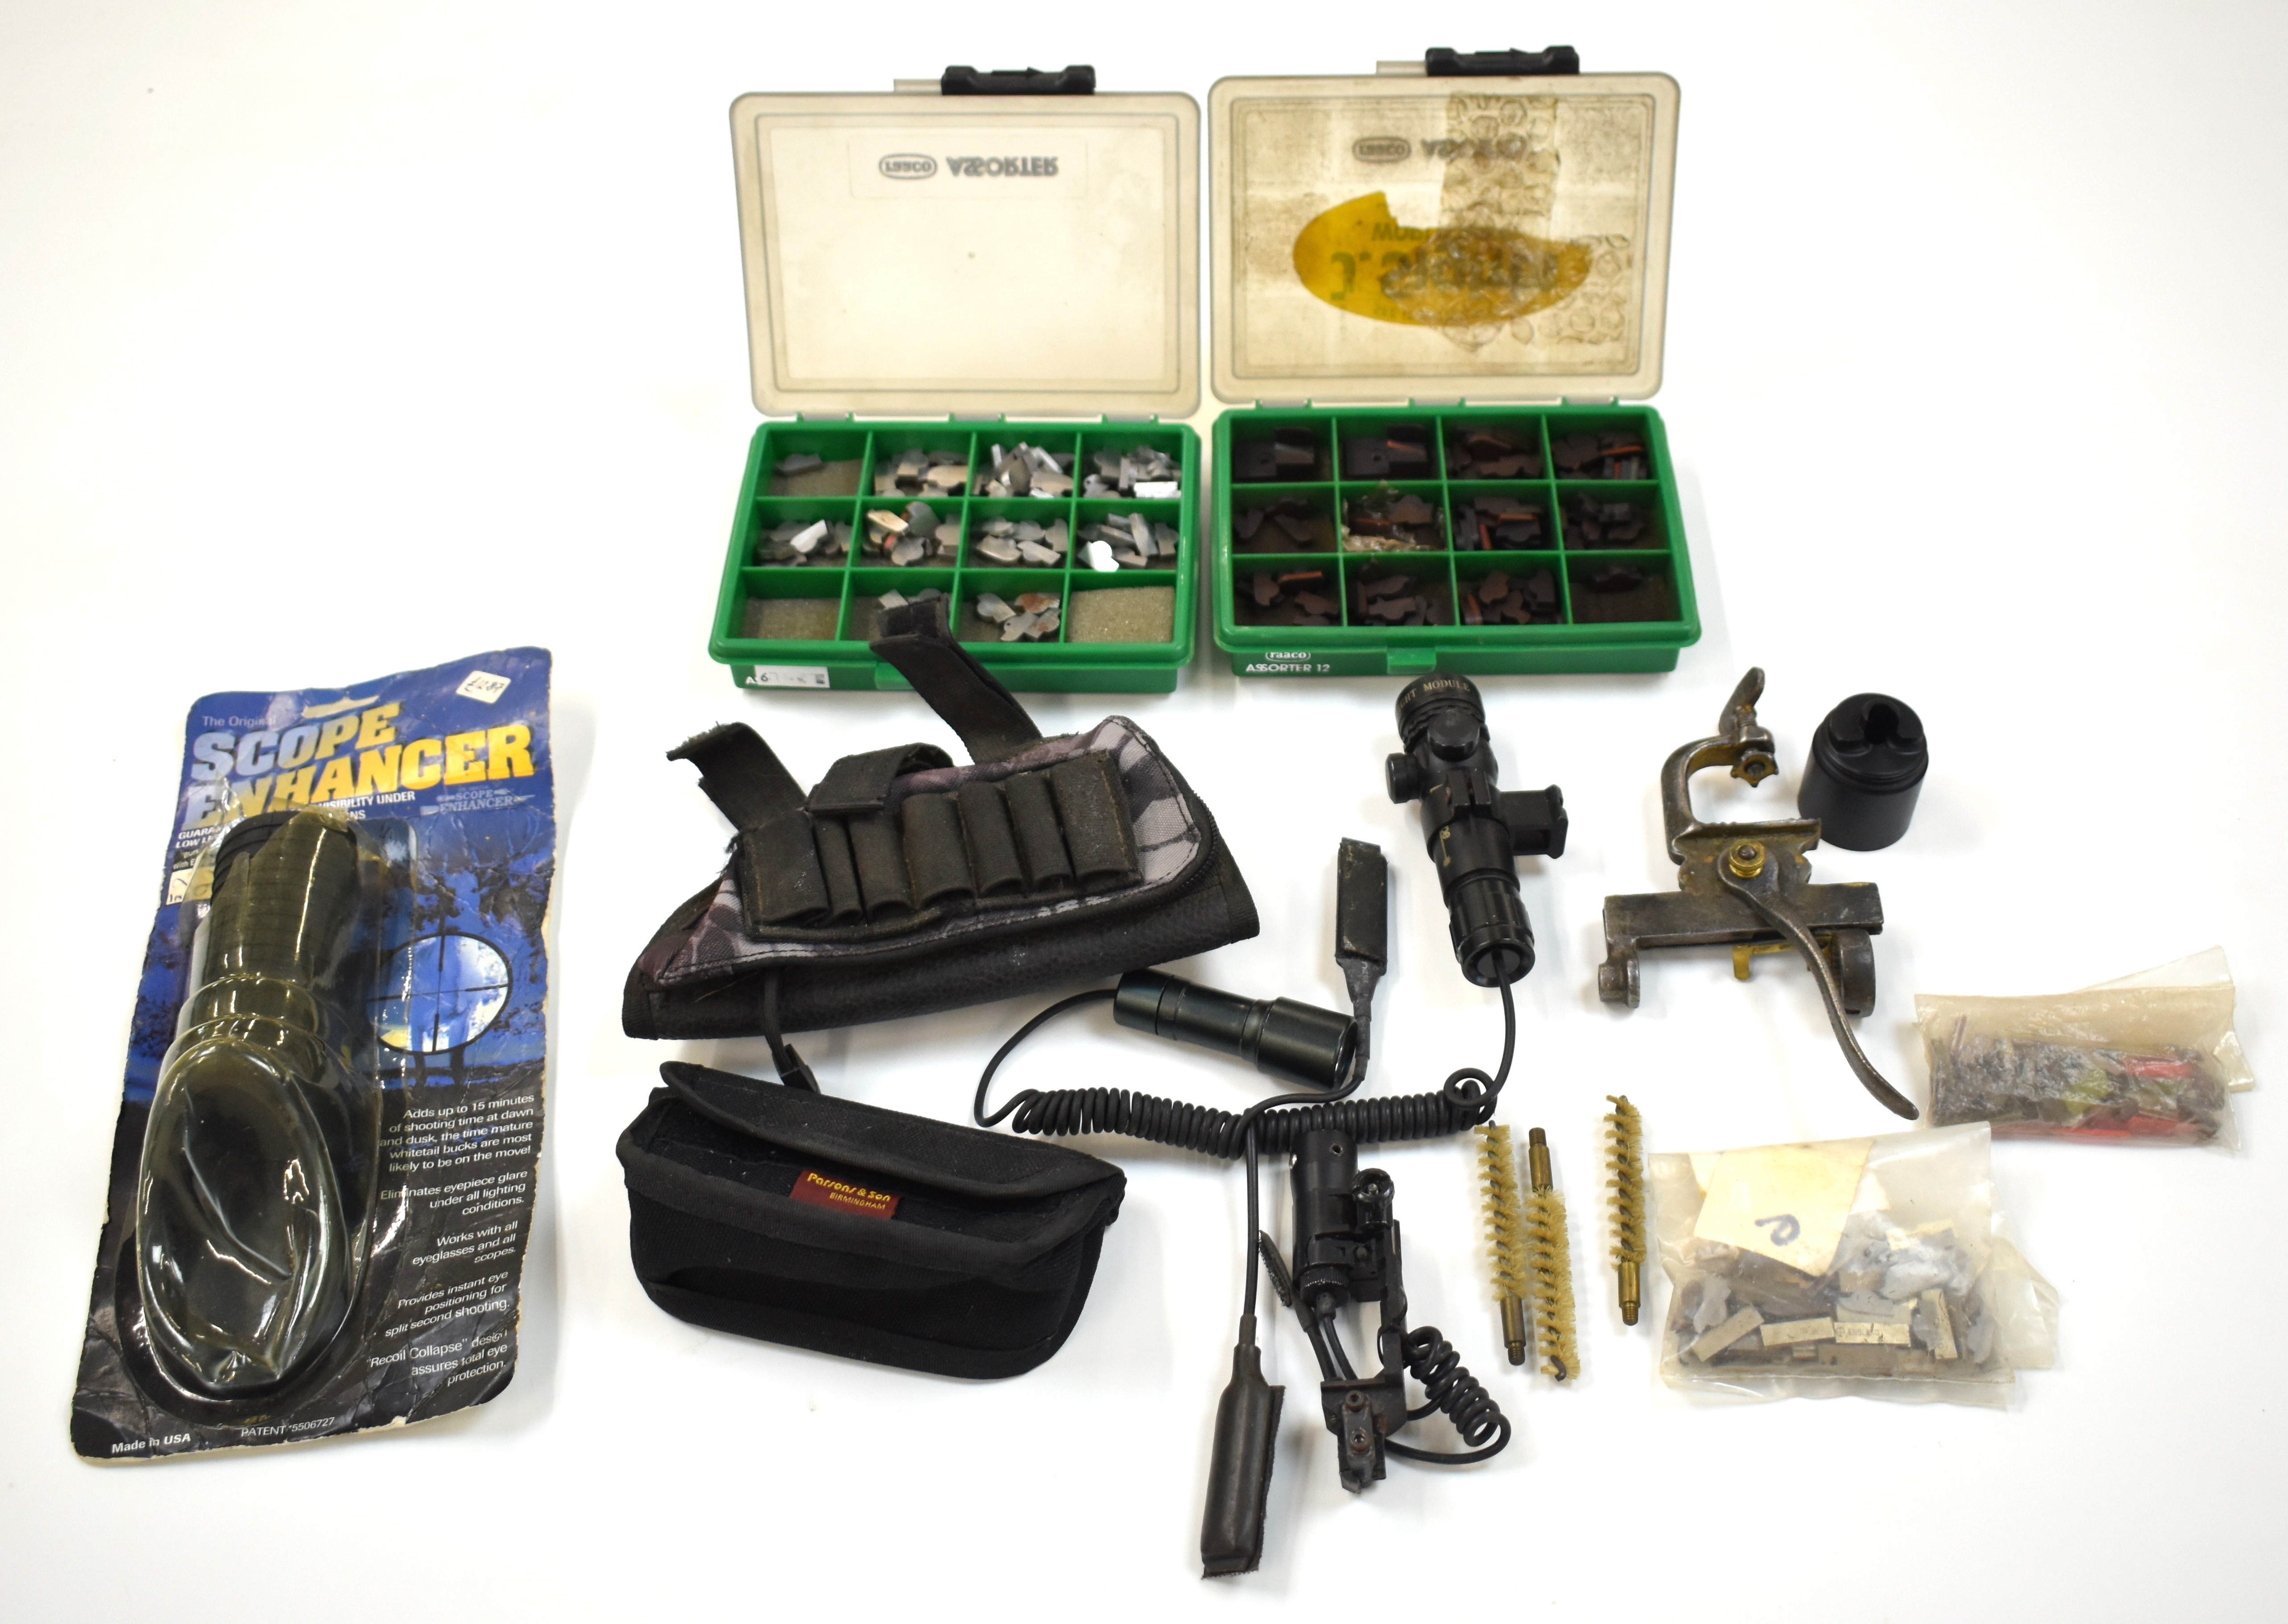 A collection of shooting accessories including gun foresights, Scope Enhancer, gun lights etc. - Image 5 of 5